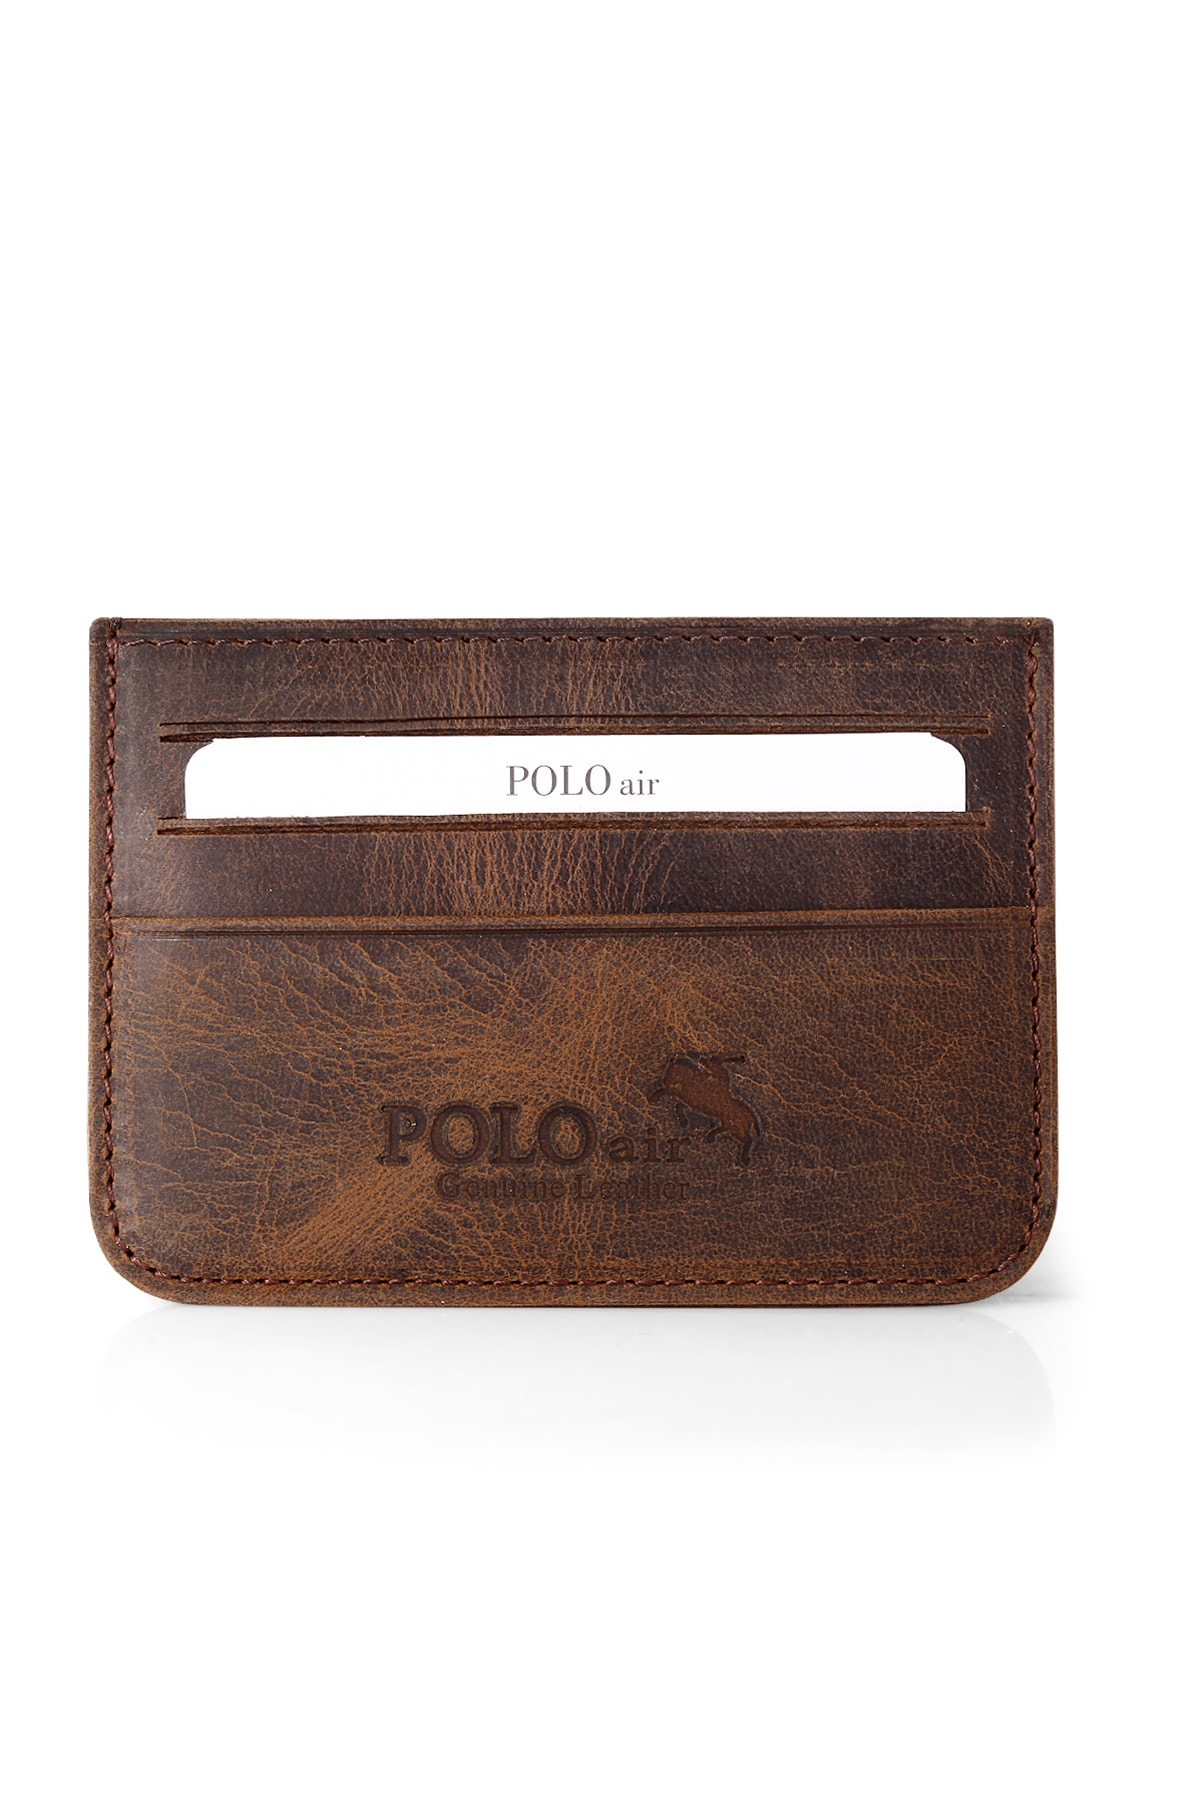 Polo Air In Genuine Leather Brown Credit Card Holder Box